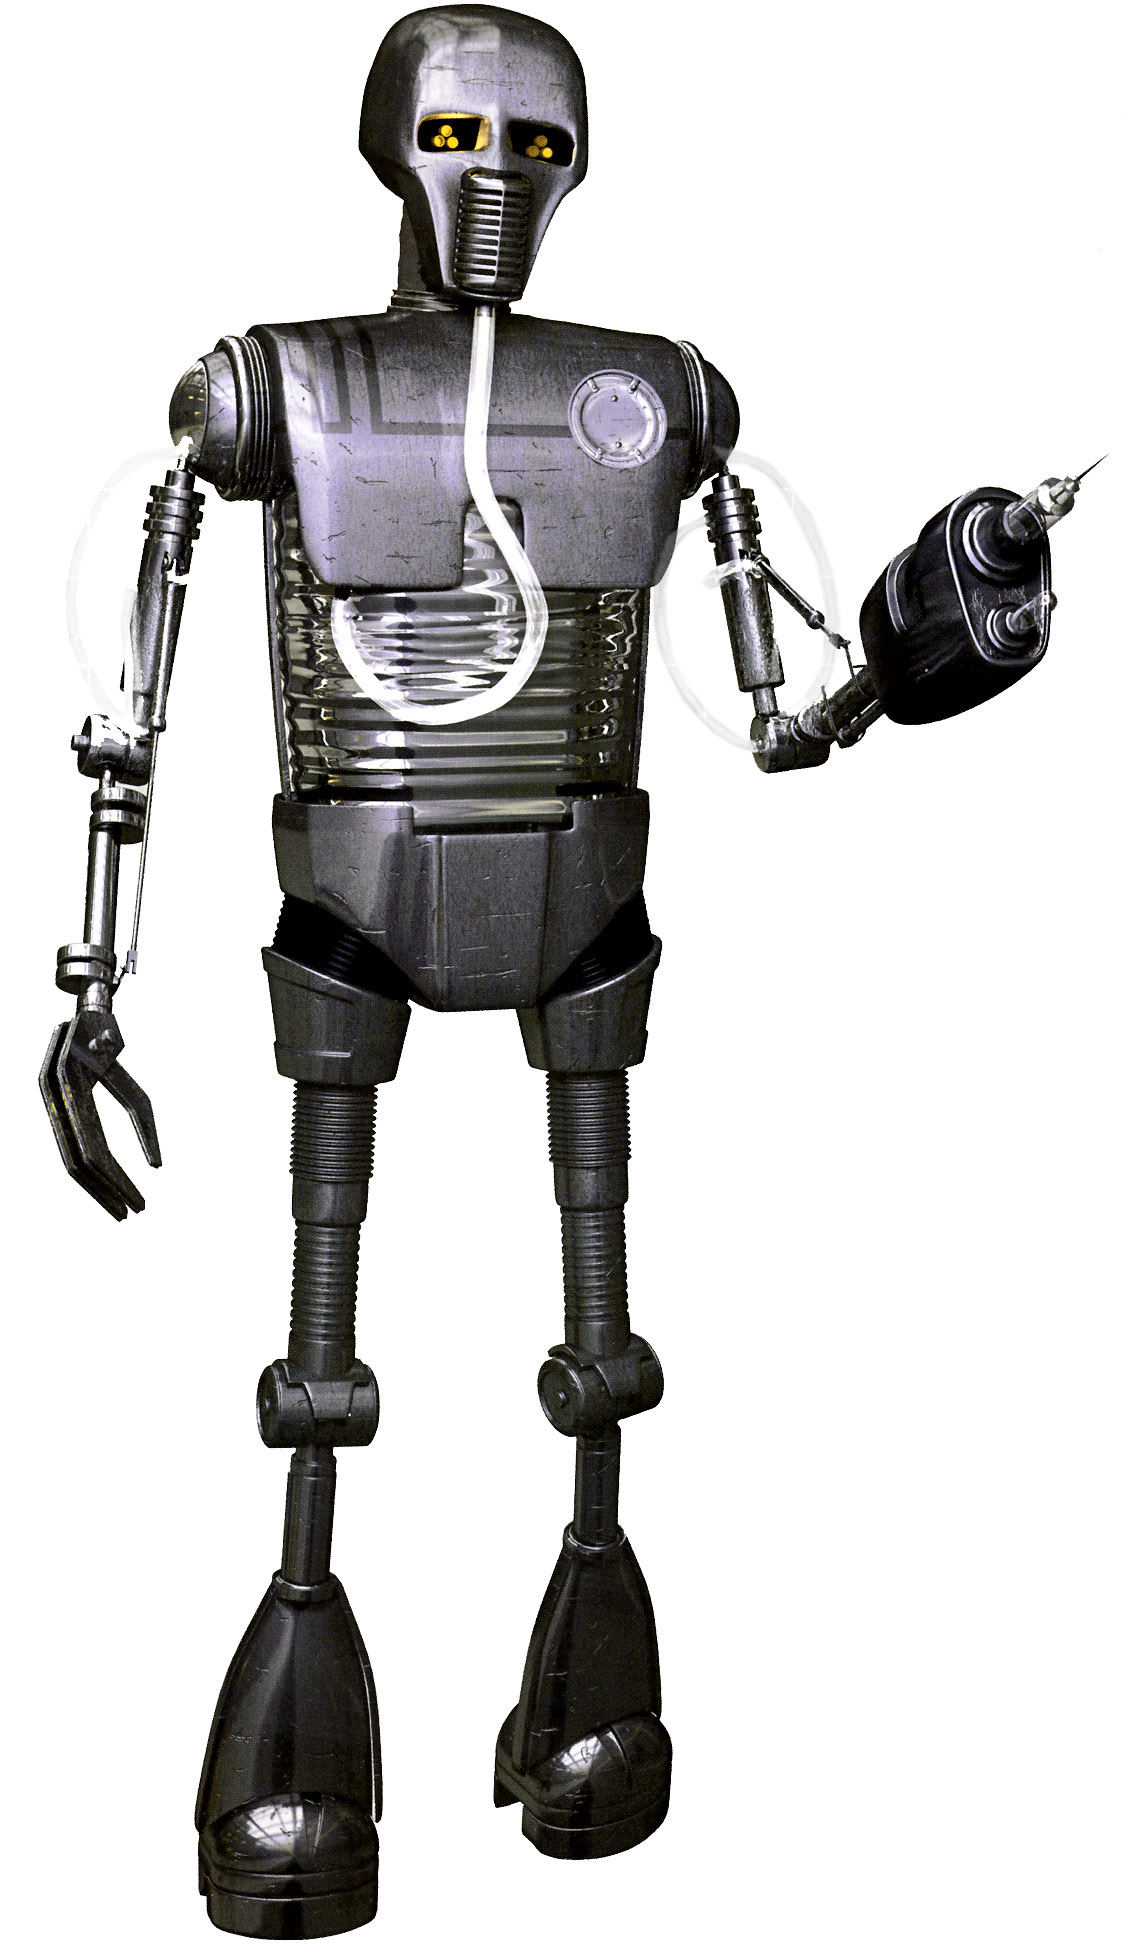 Details about   Star Wars Power of The Force 2-1B Medic Droid w/Medical Diagnostic Computer 